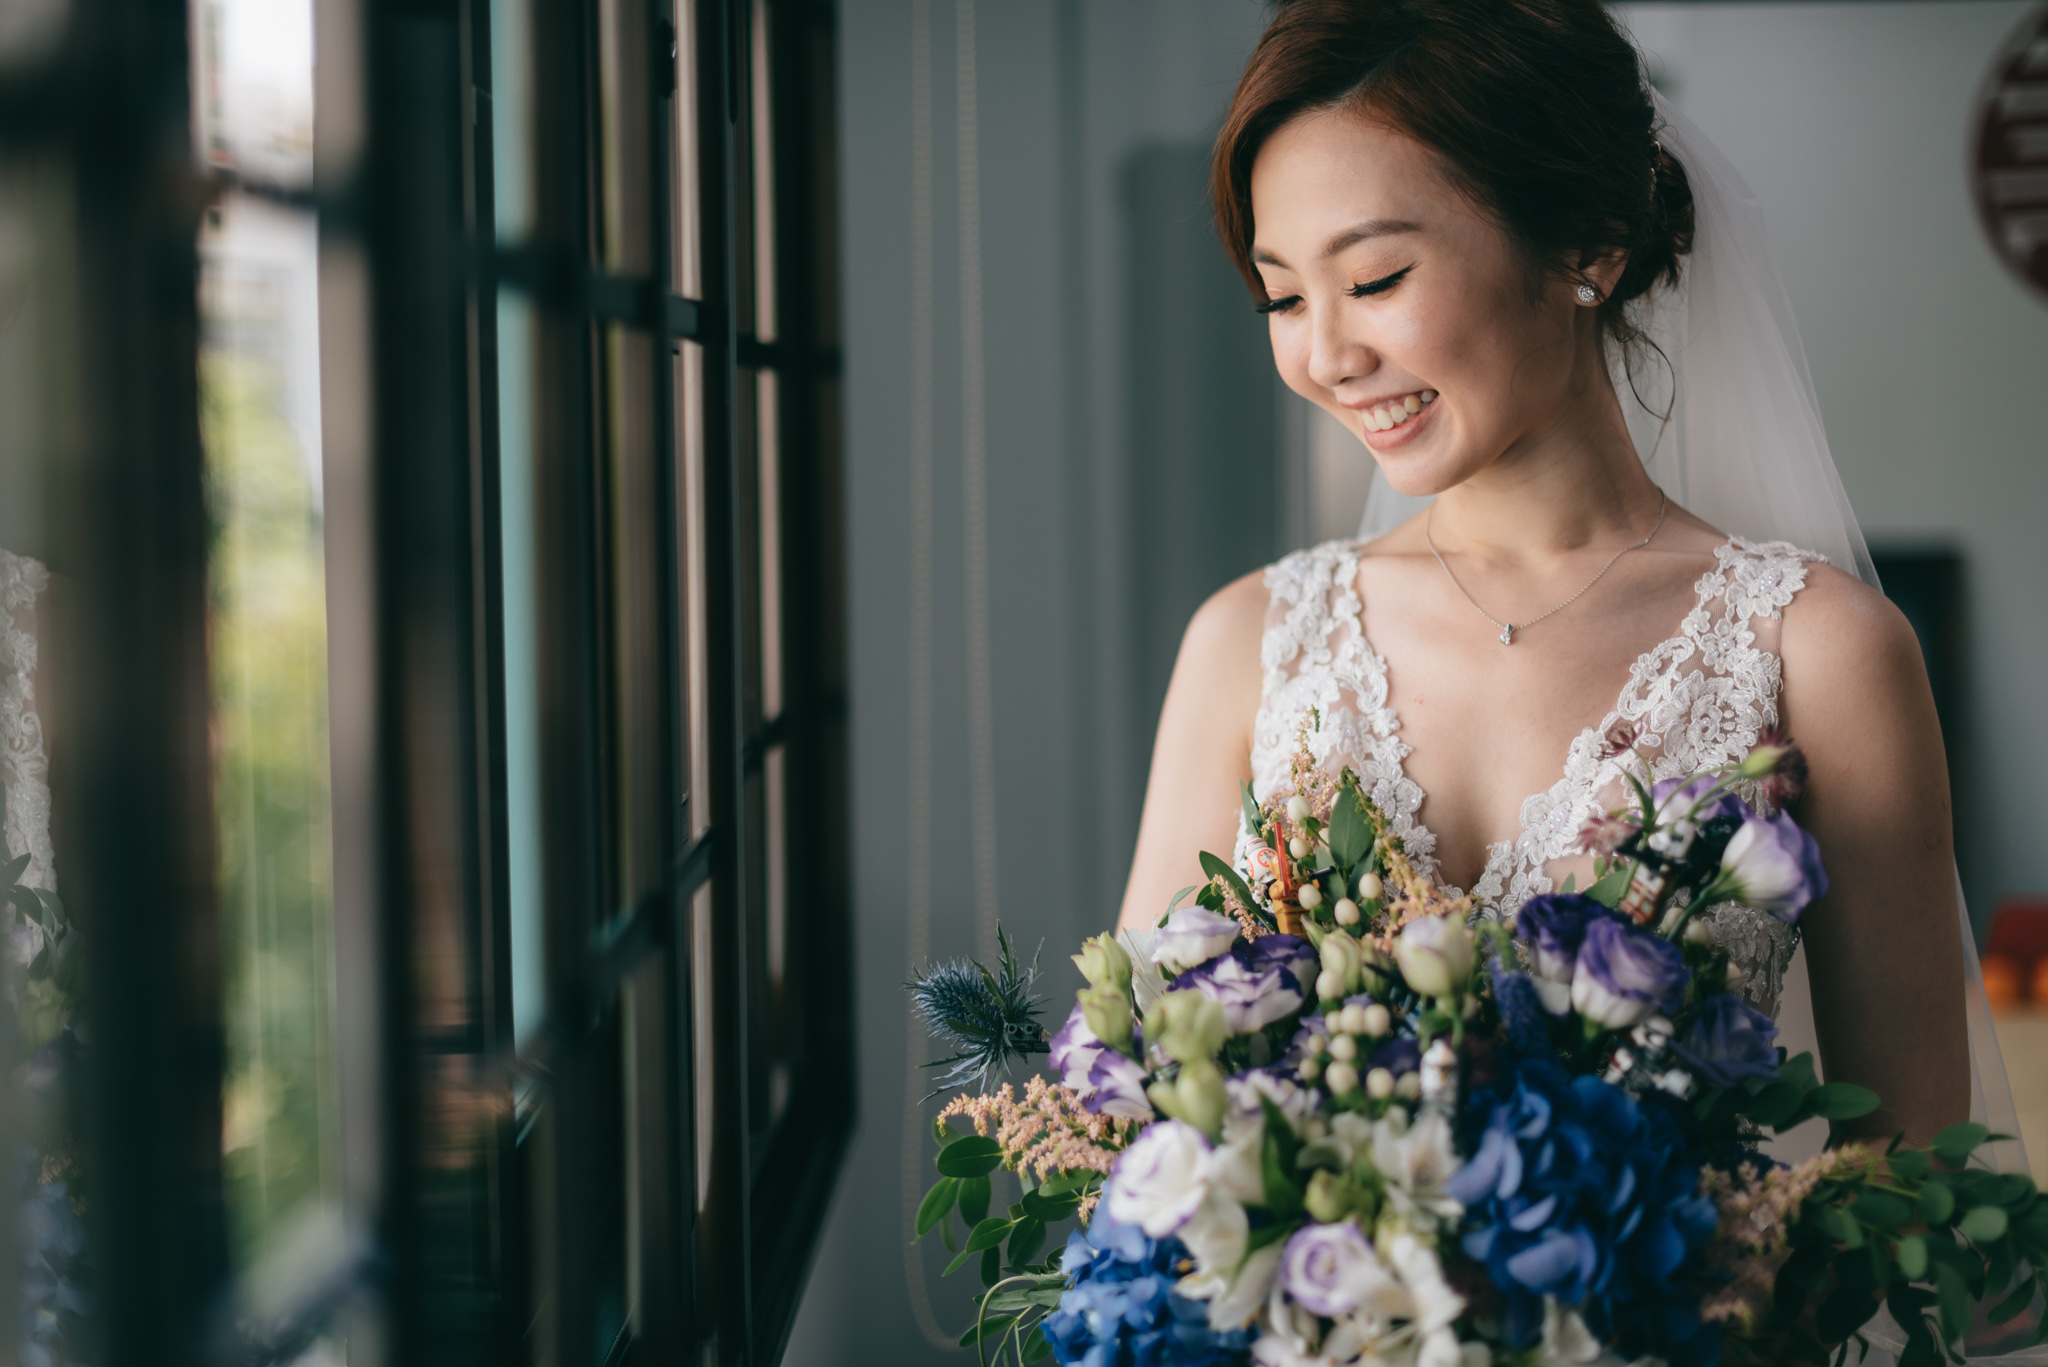 Eunice & Winshire Wedding Day Highlights (resized for sharing) - 089.jpg